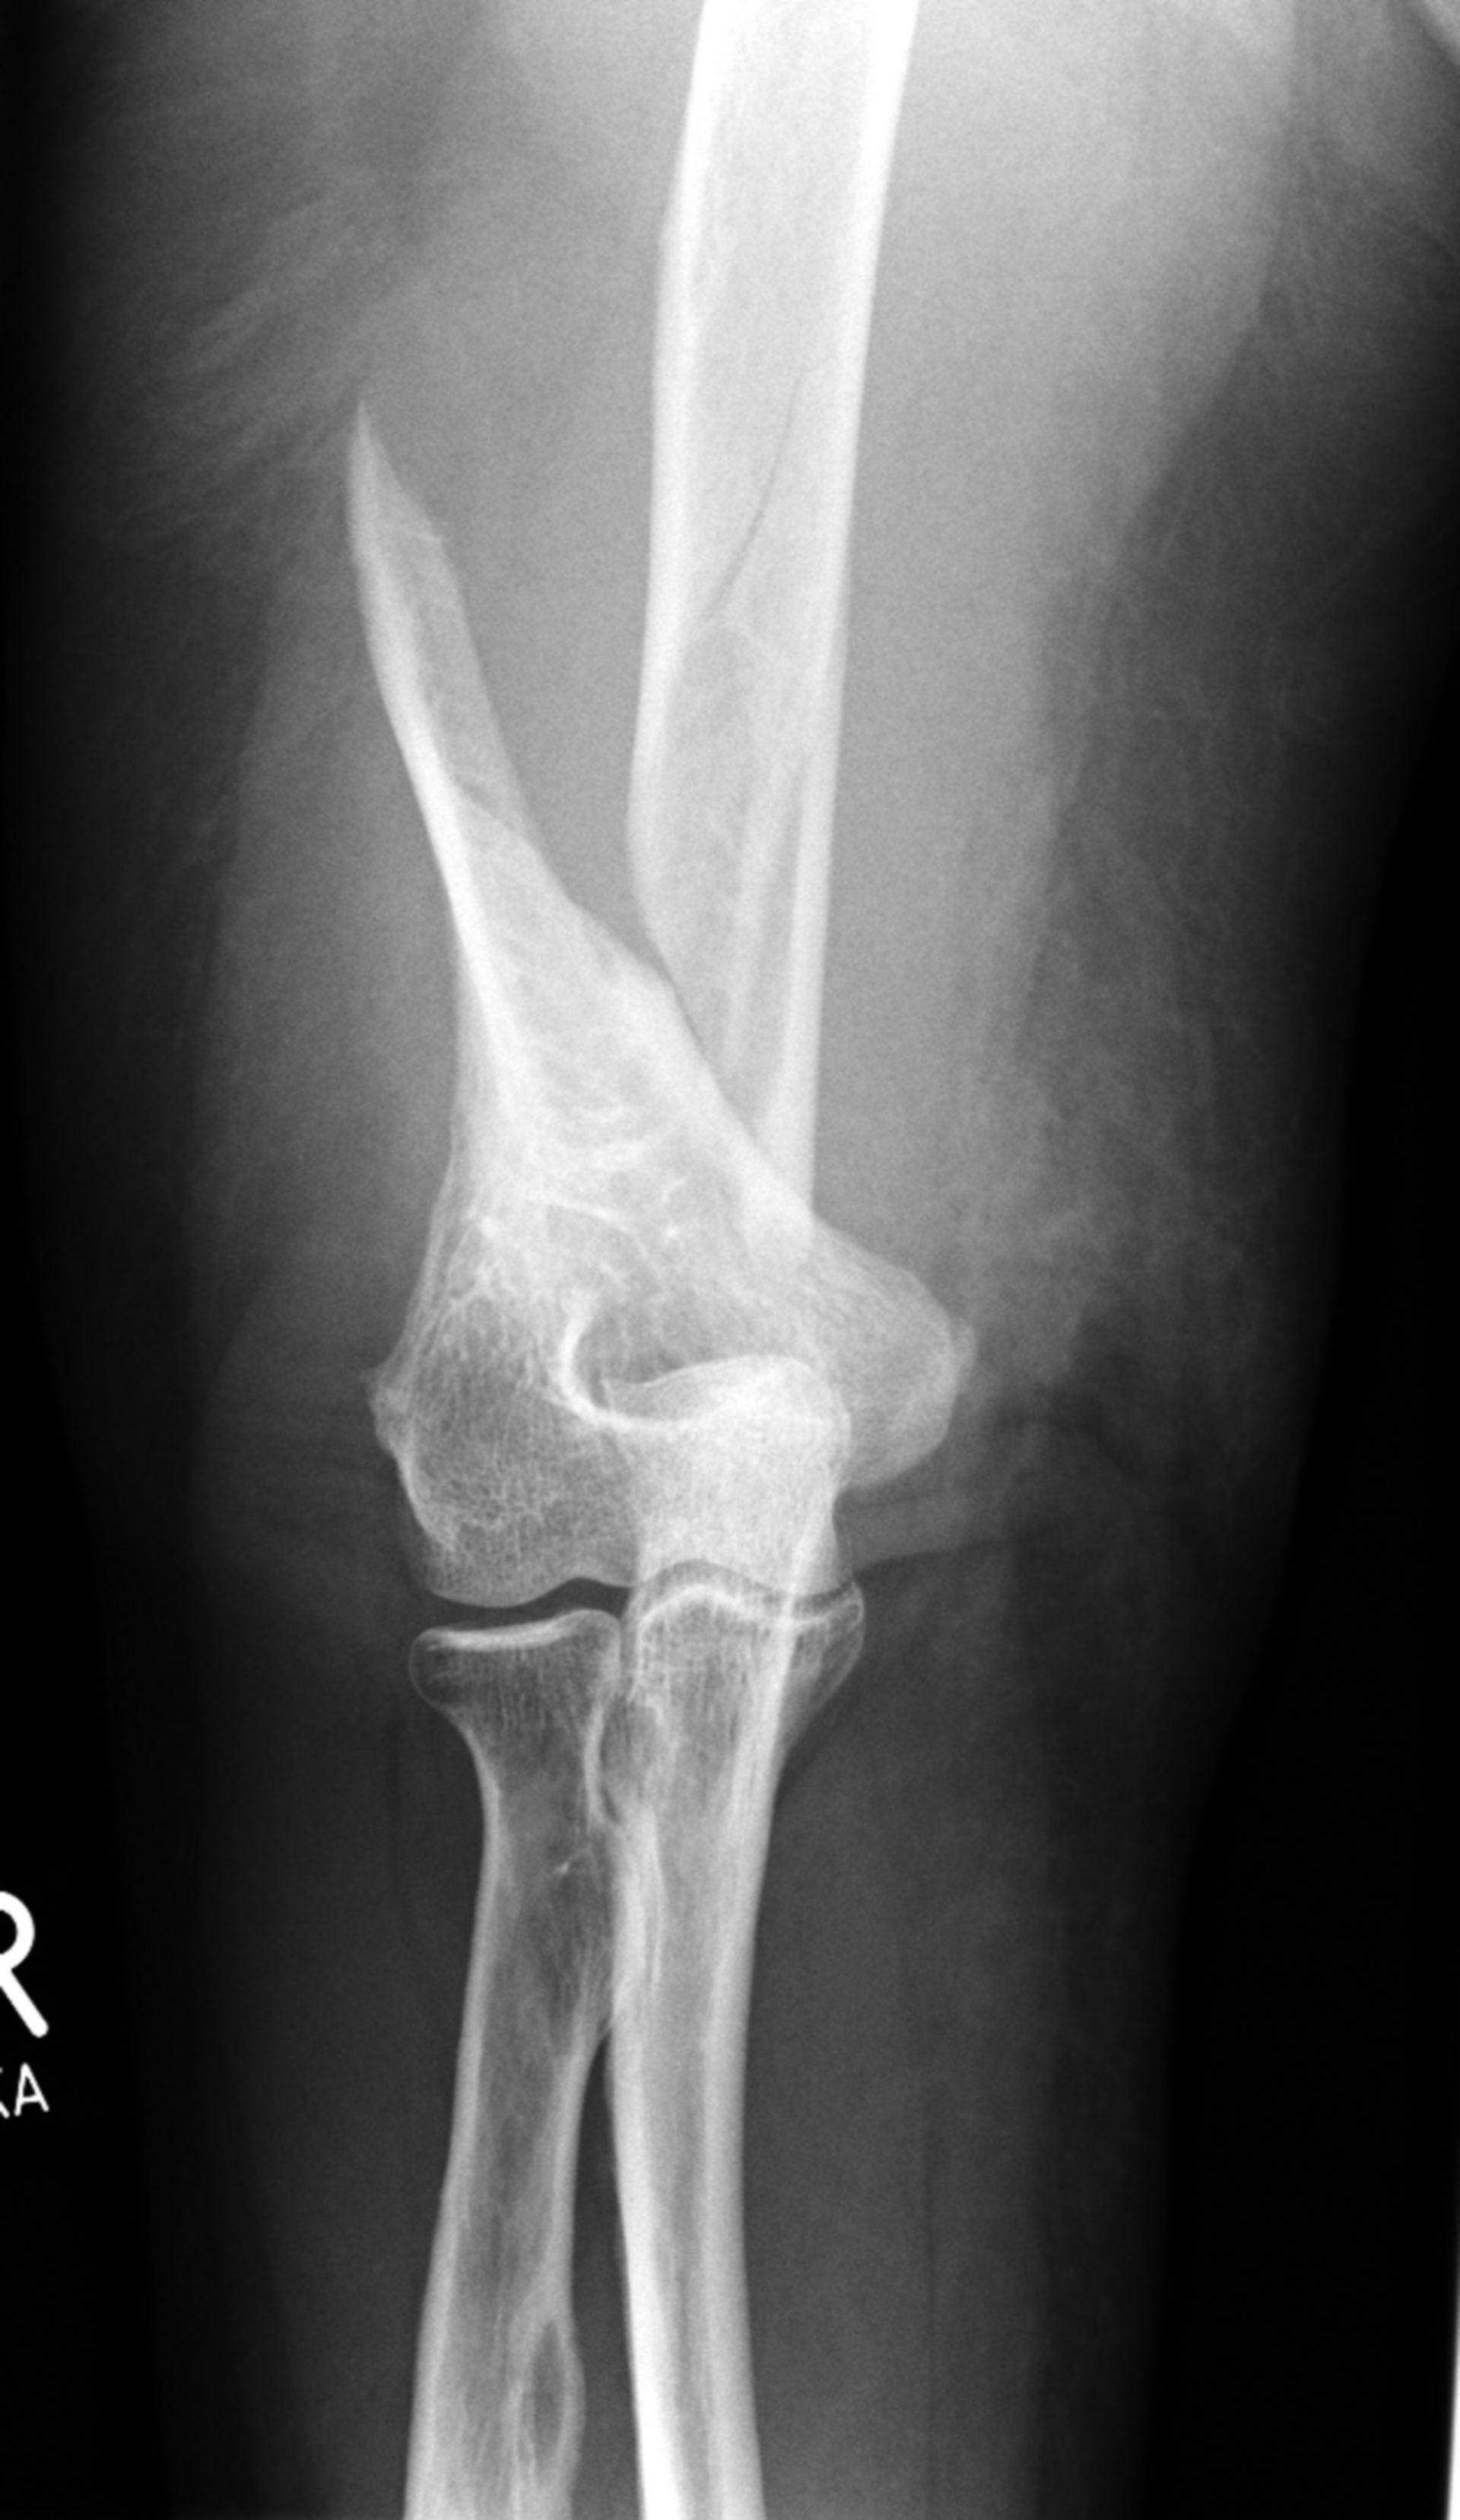 Supracondylar fracture of humerus